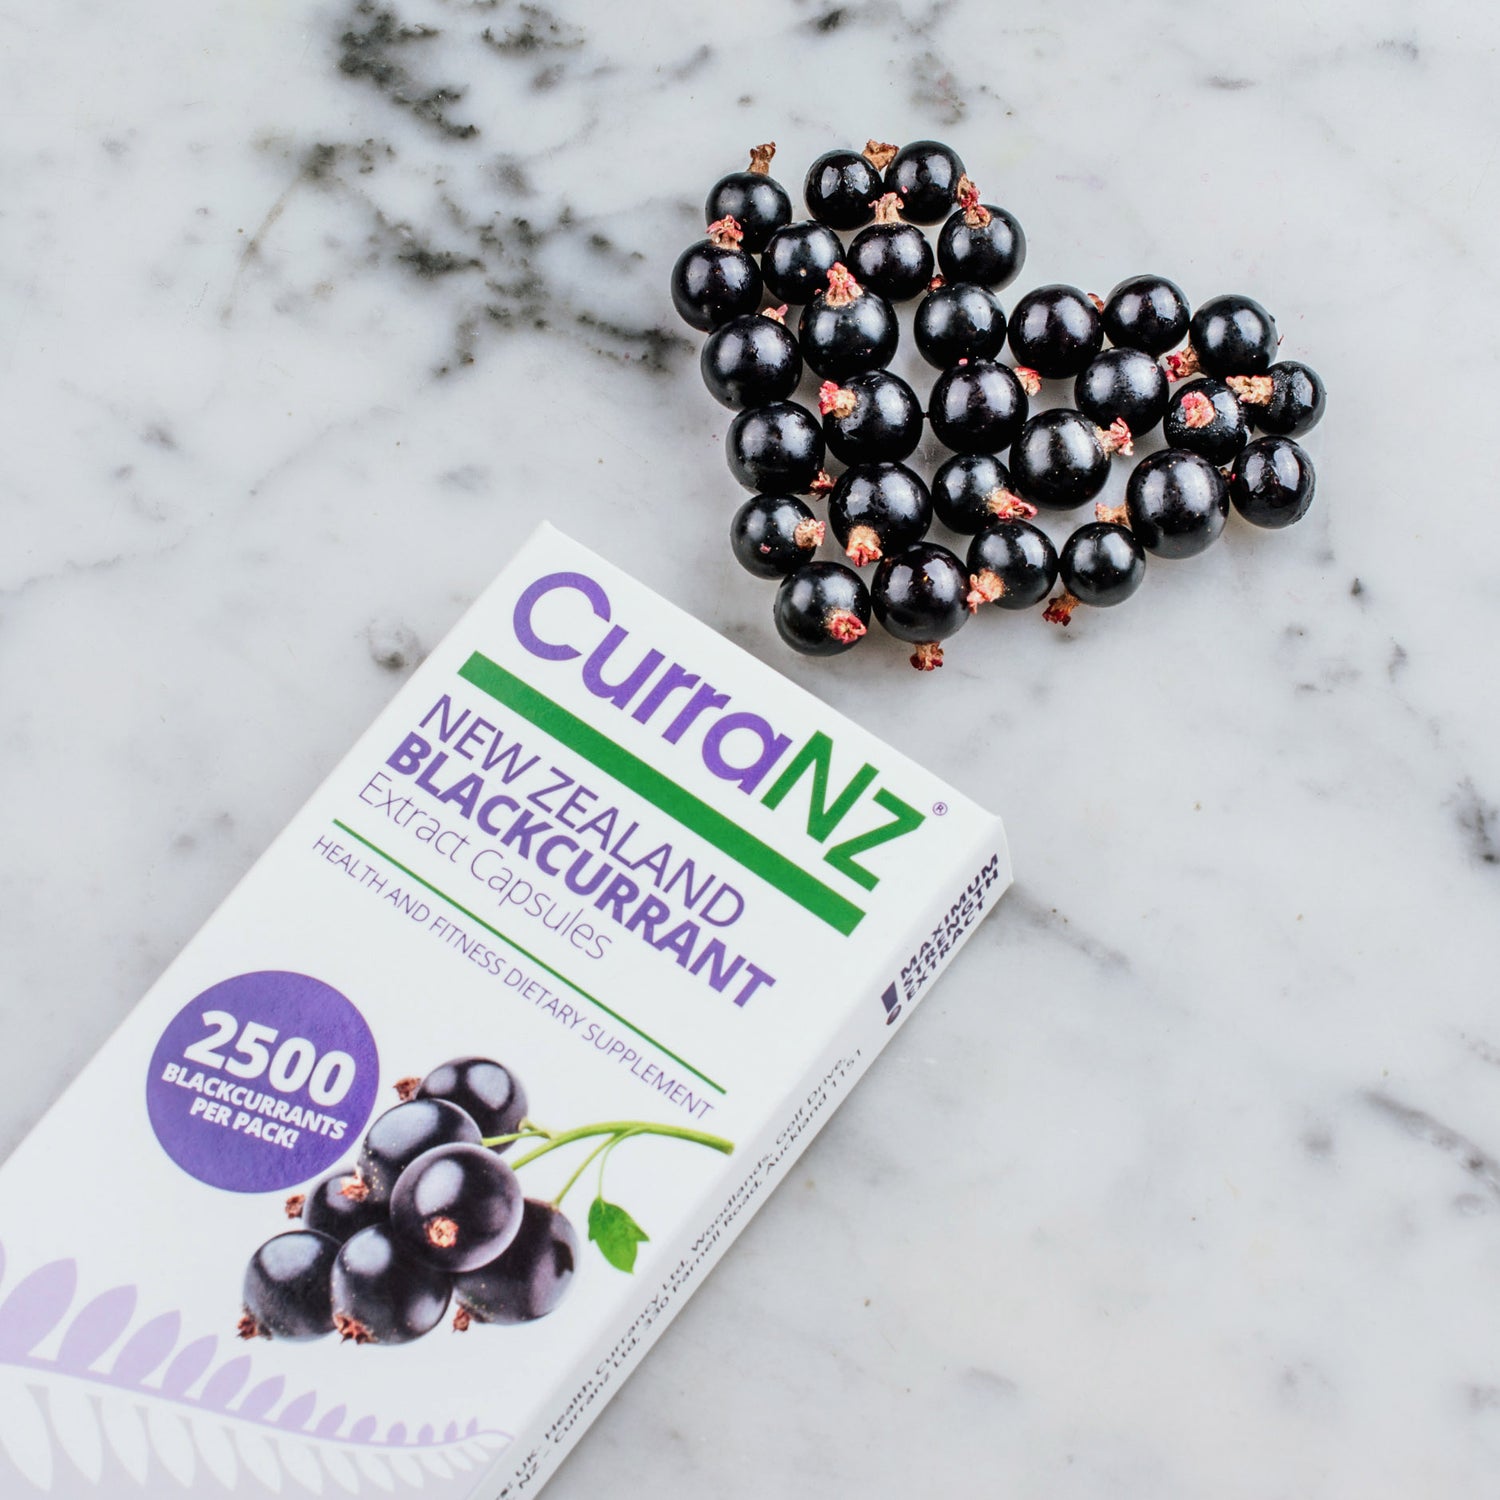 CurraNZ® Supplements with 100% natural New Zealand blackcurrants